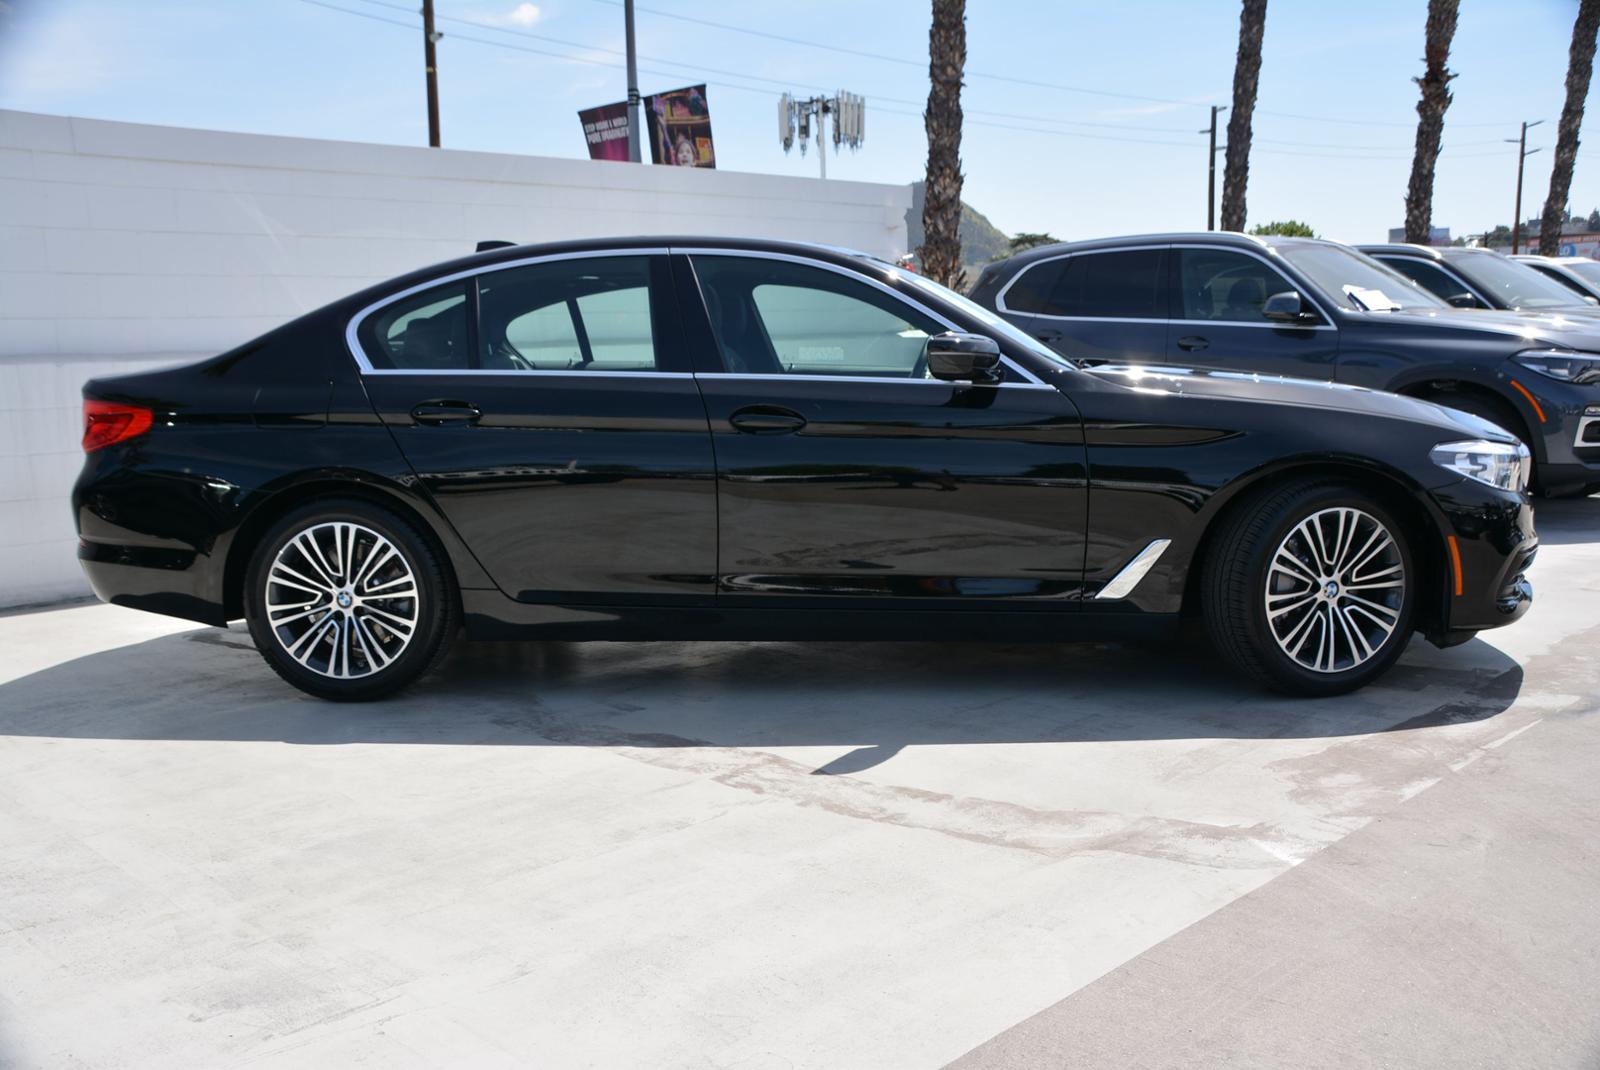 Pre-Owned 2019 BMW 5 Series 530i 530i Sedan in North Hollywood #L67424 ...